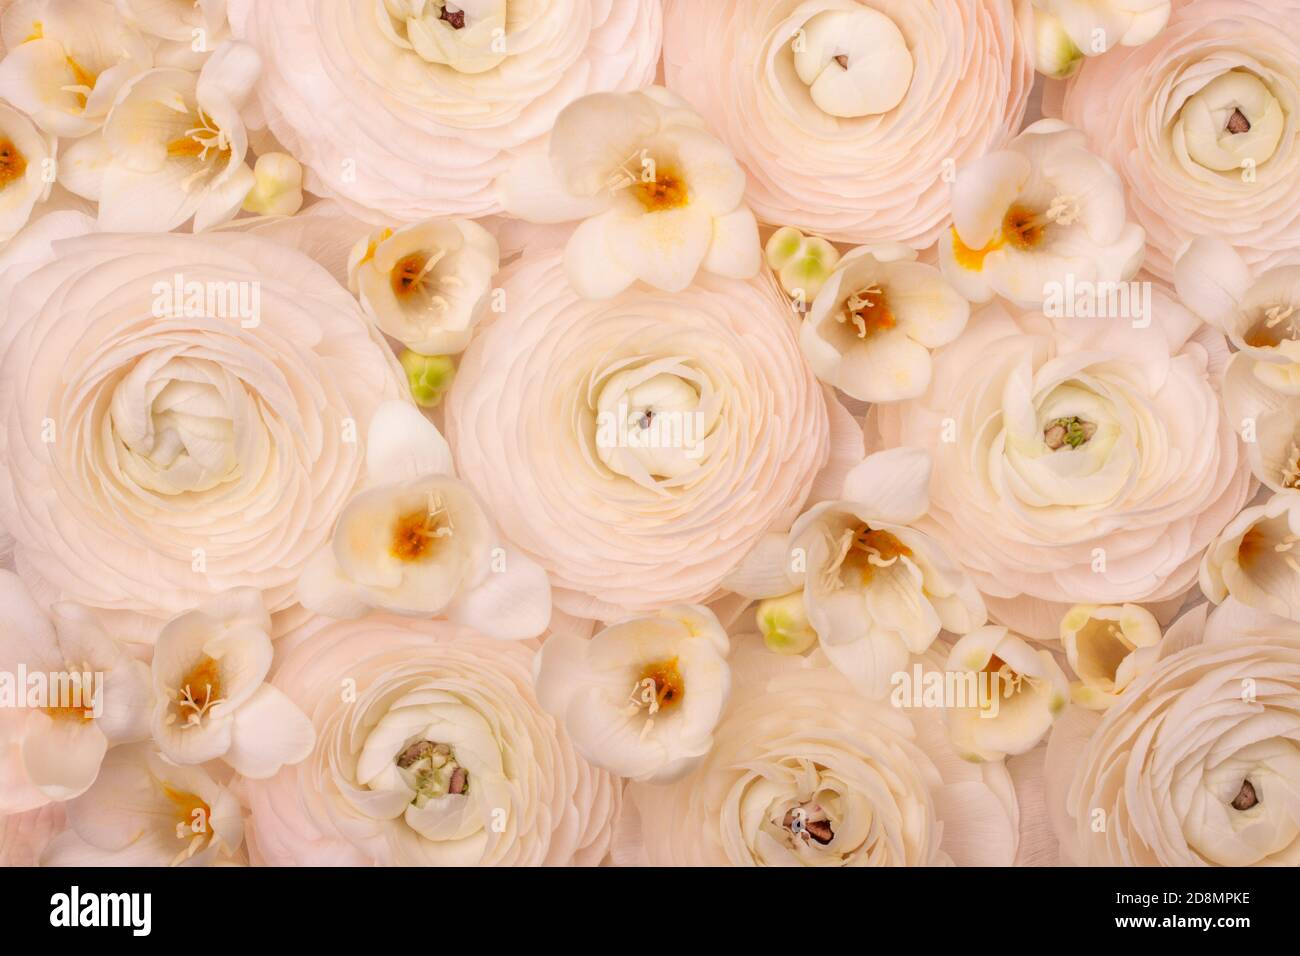 Light floral composition of natural fresh ranunculi and freesia in a pastel pink-cream colour. Stock Photo